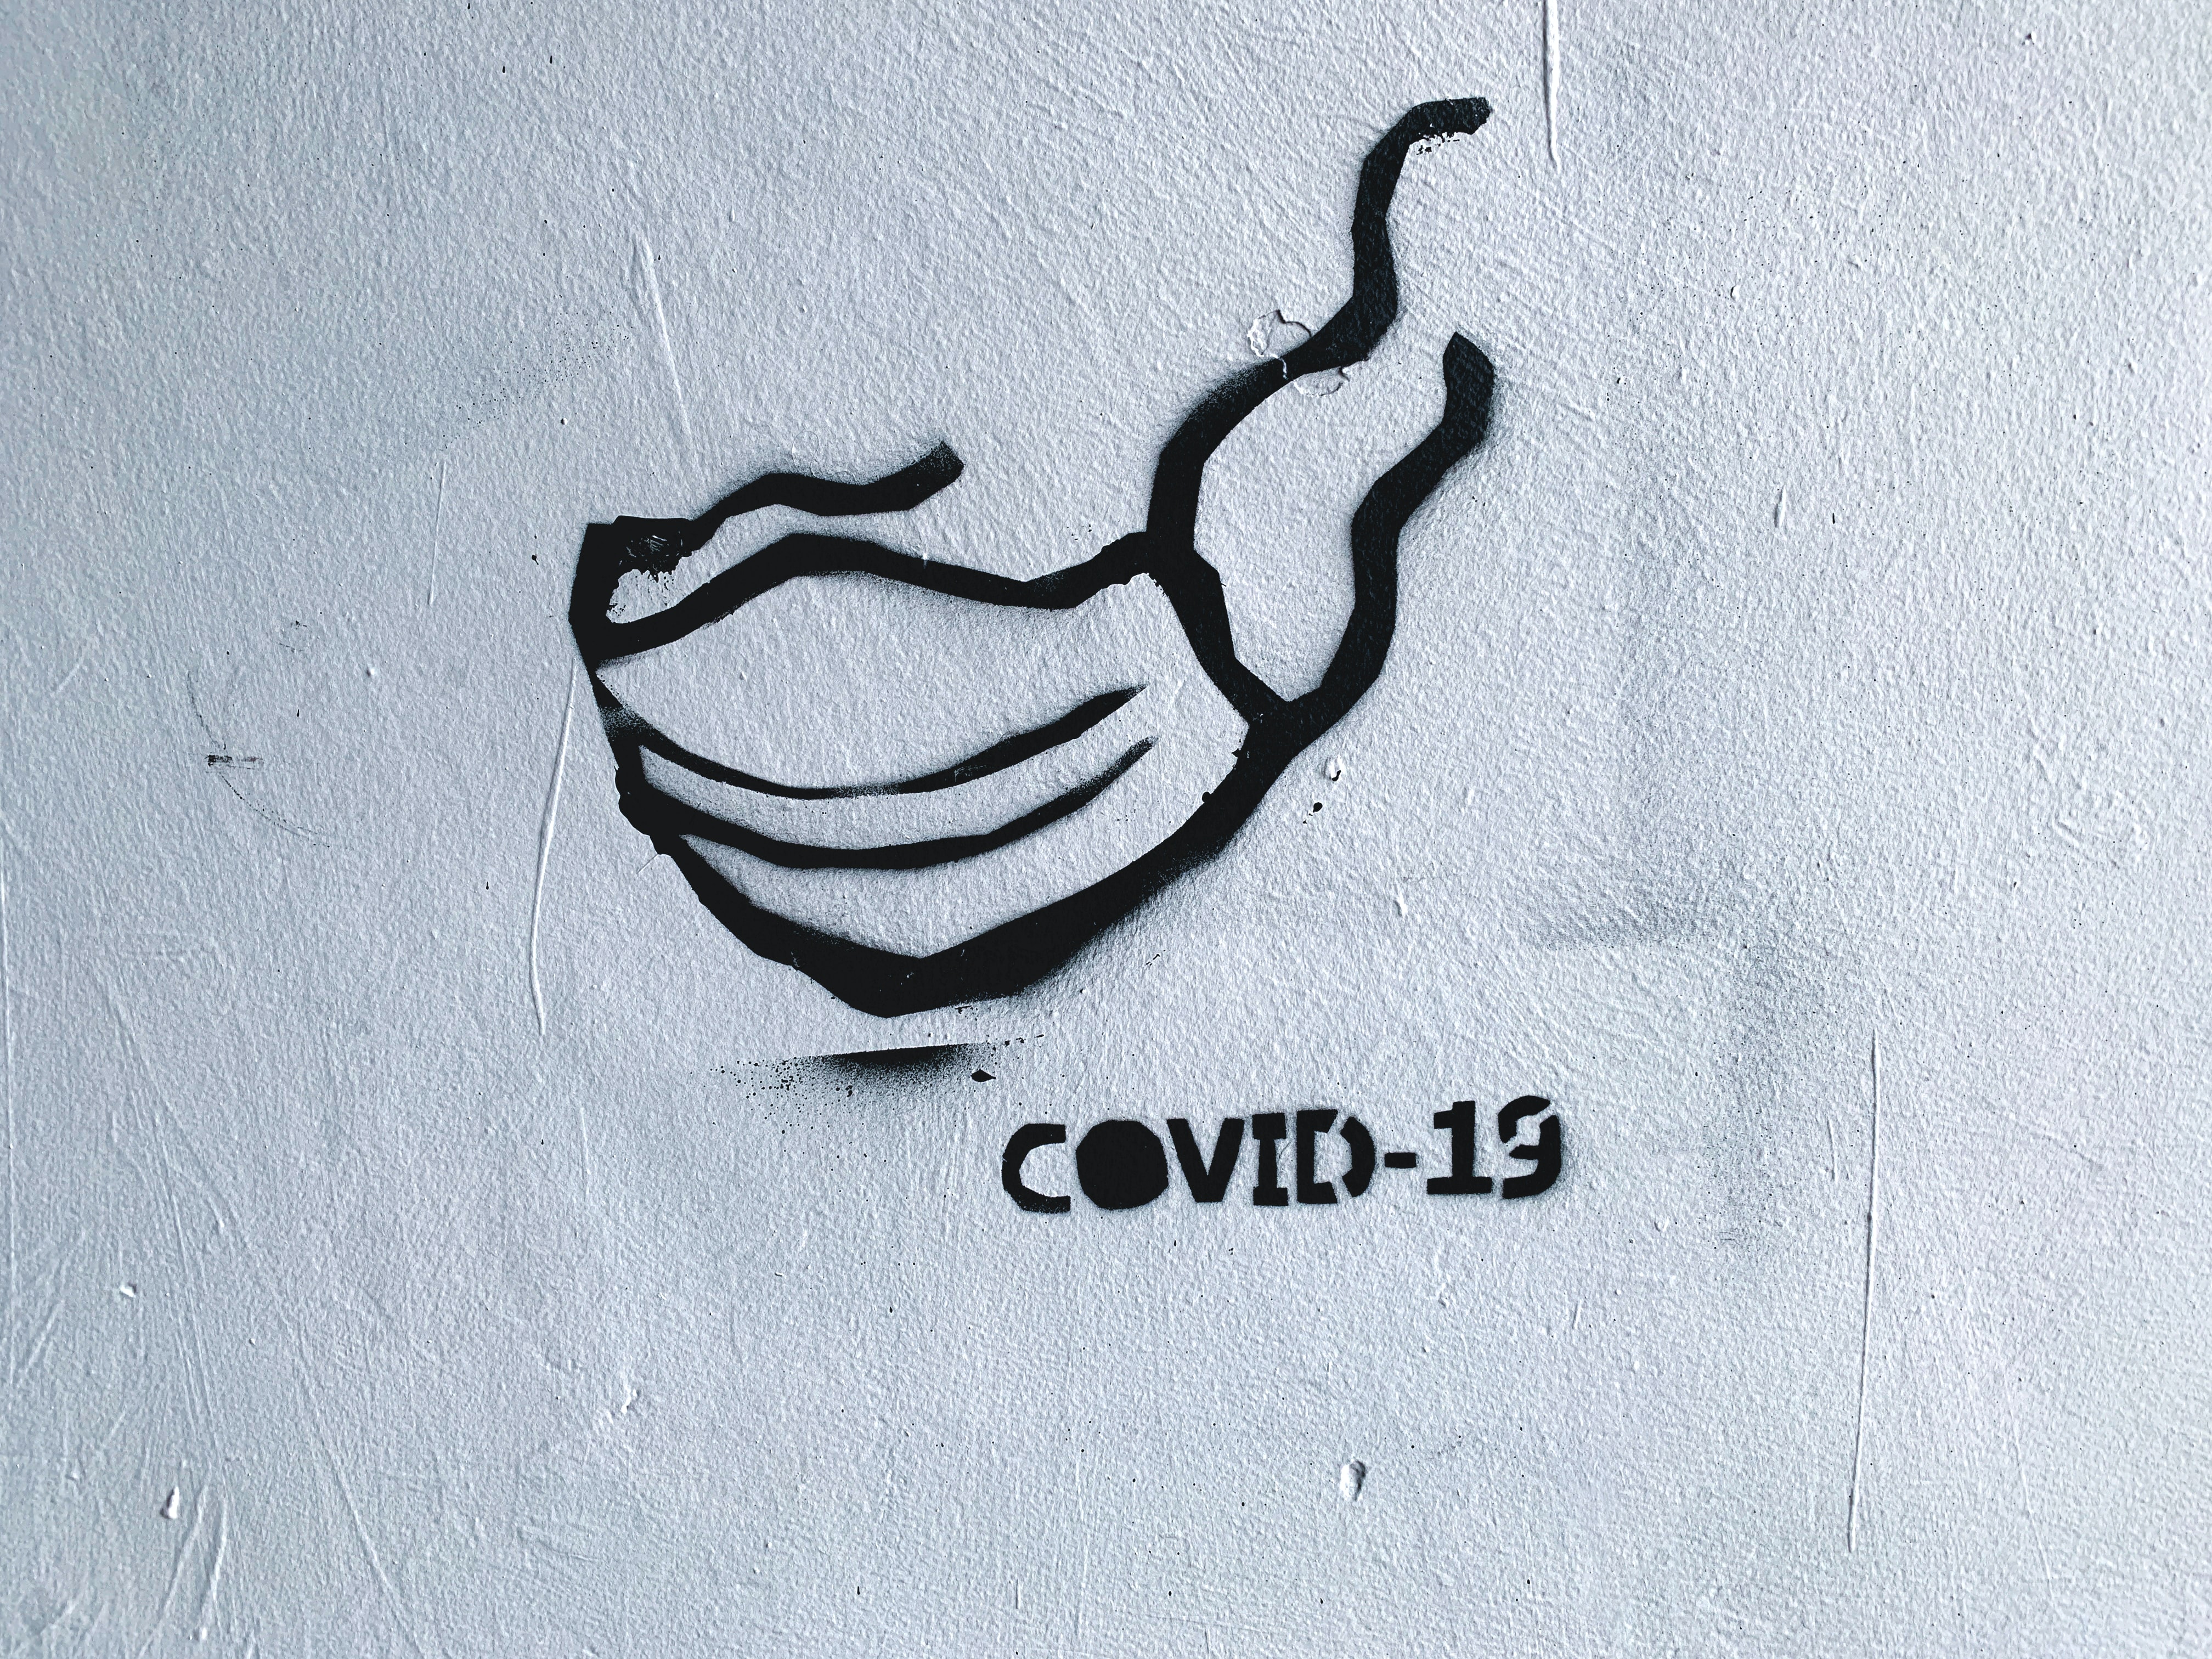 COVID-19: What’s Next?